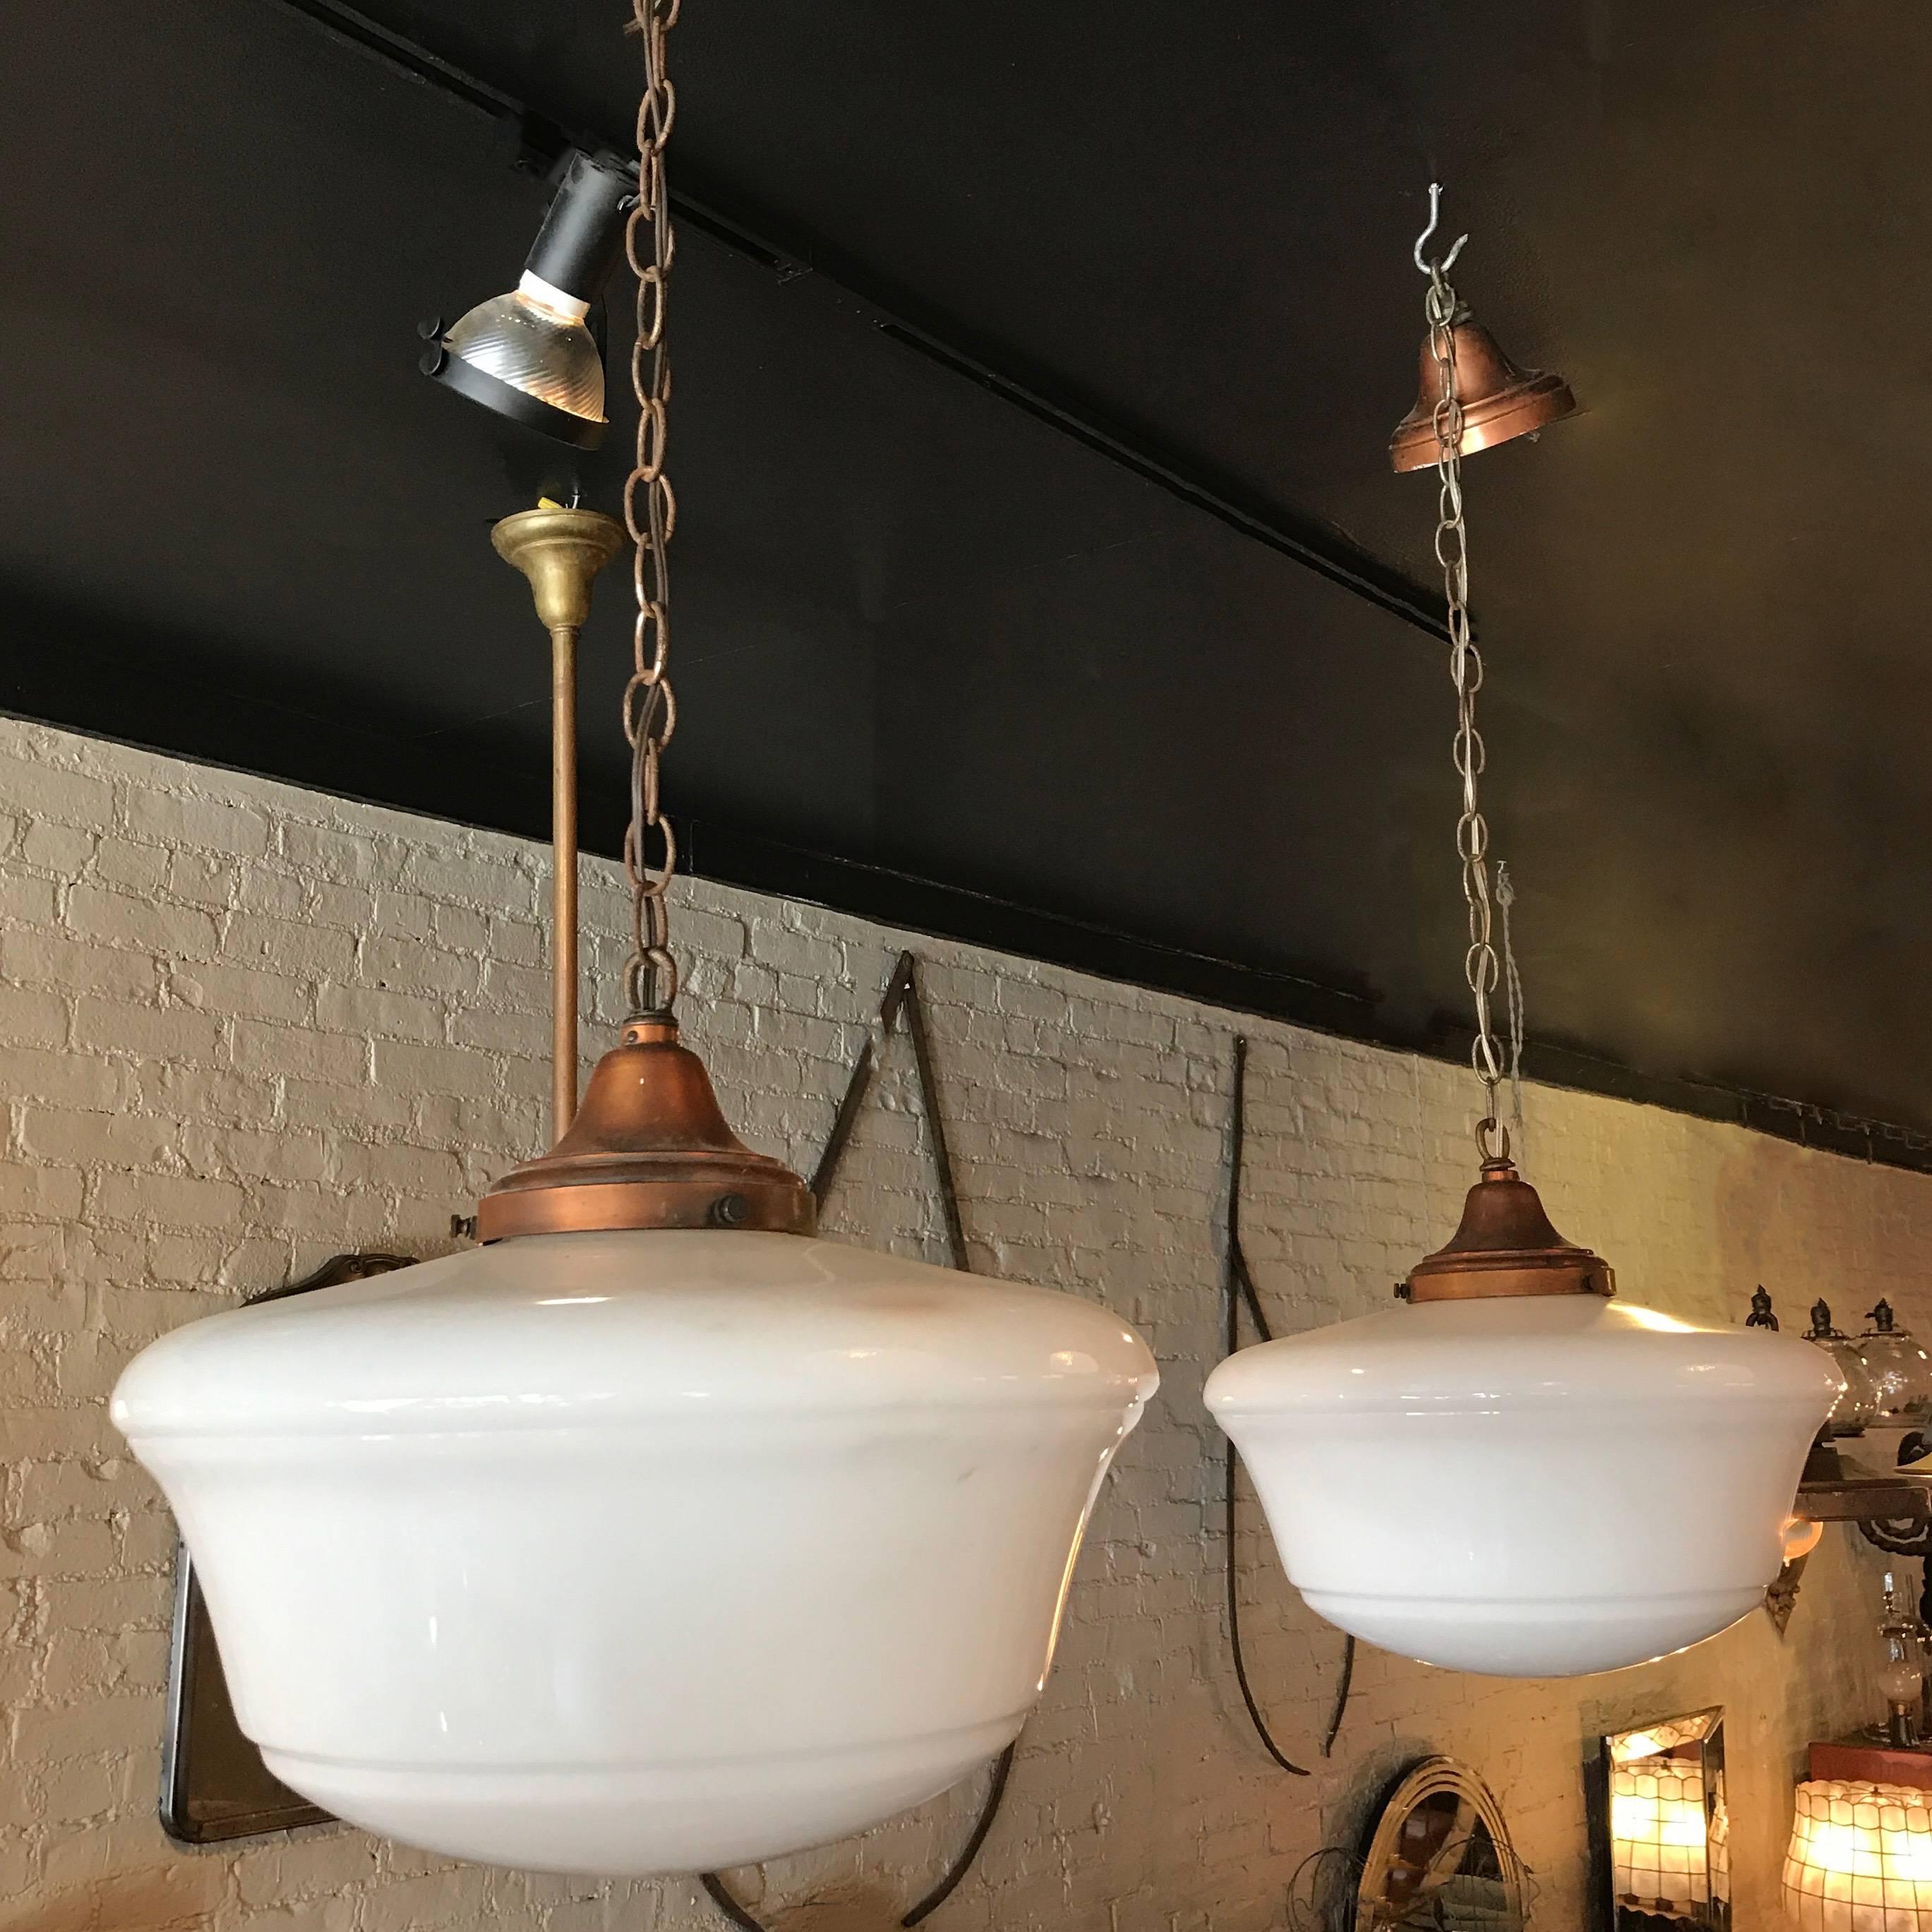 Pair of Art Deco, library pendant lights feature milk glass shades with copper fitters, 36